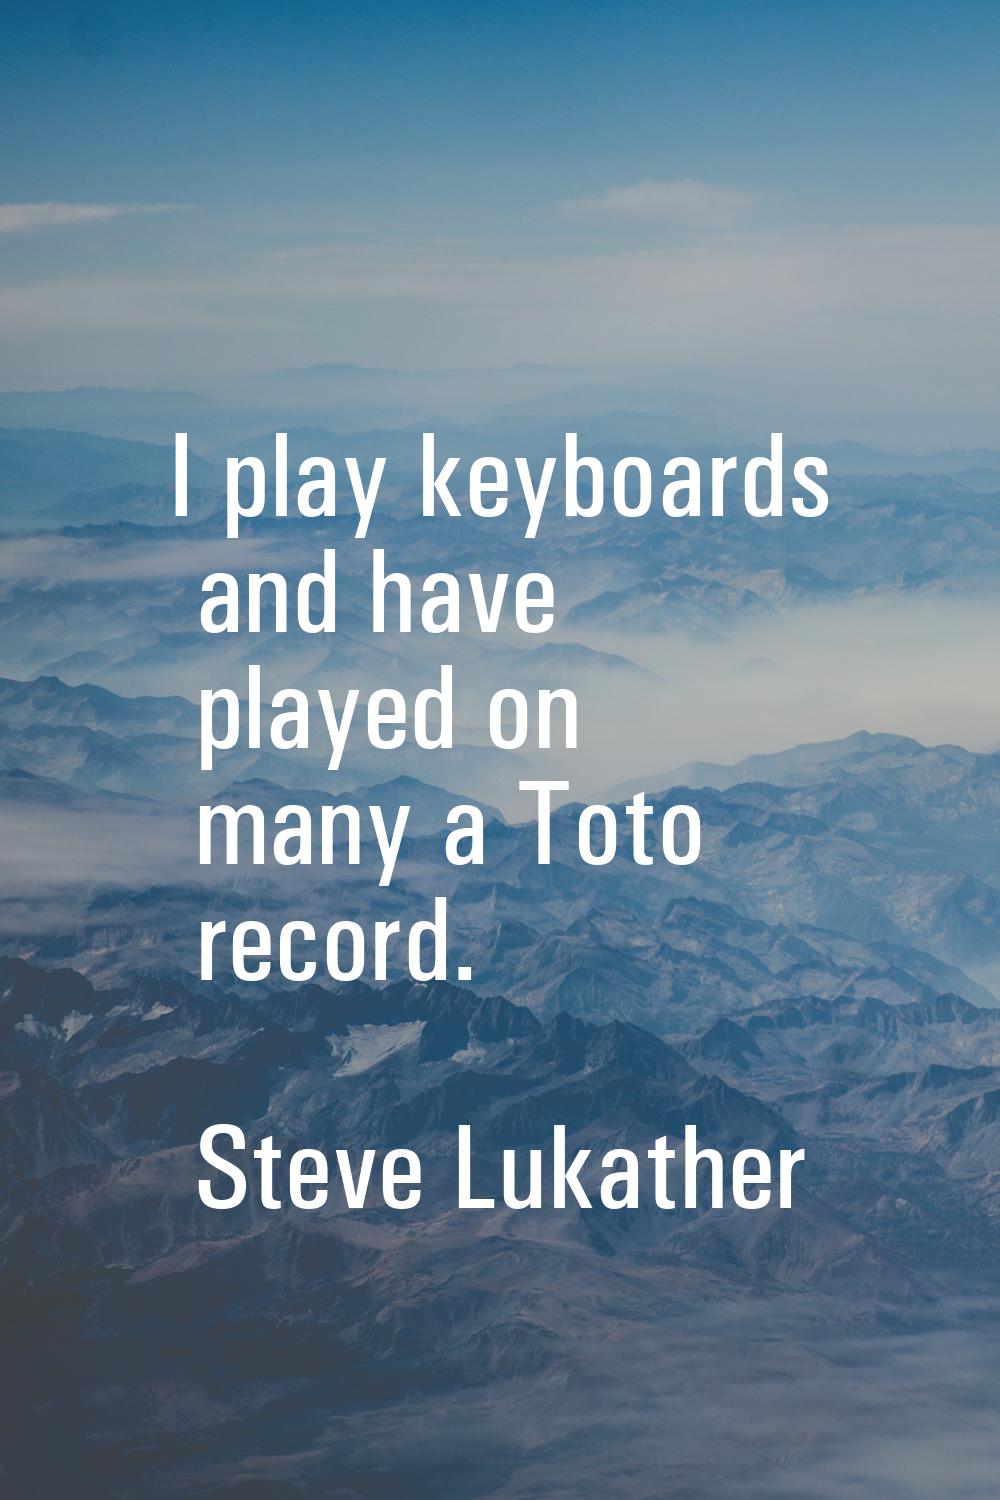 I play keyboards and have played on many a Toto record.